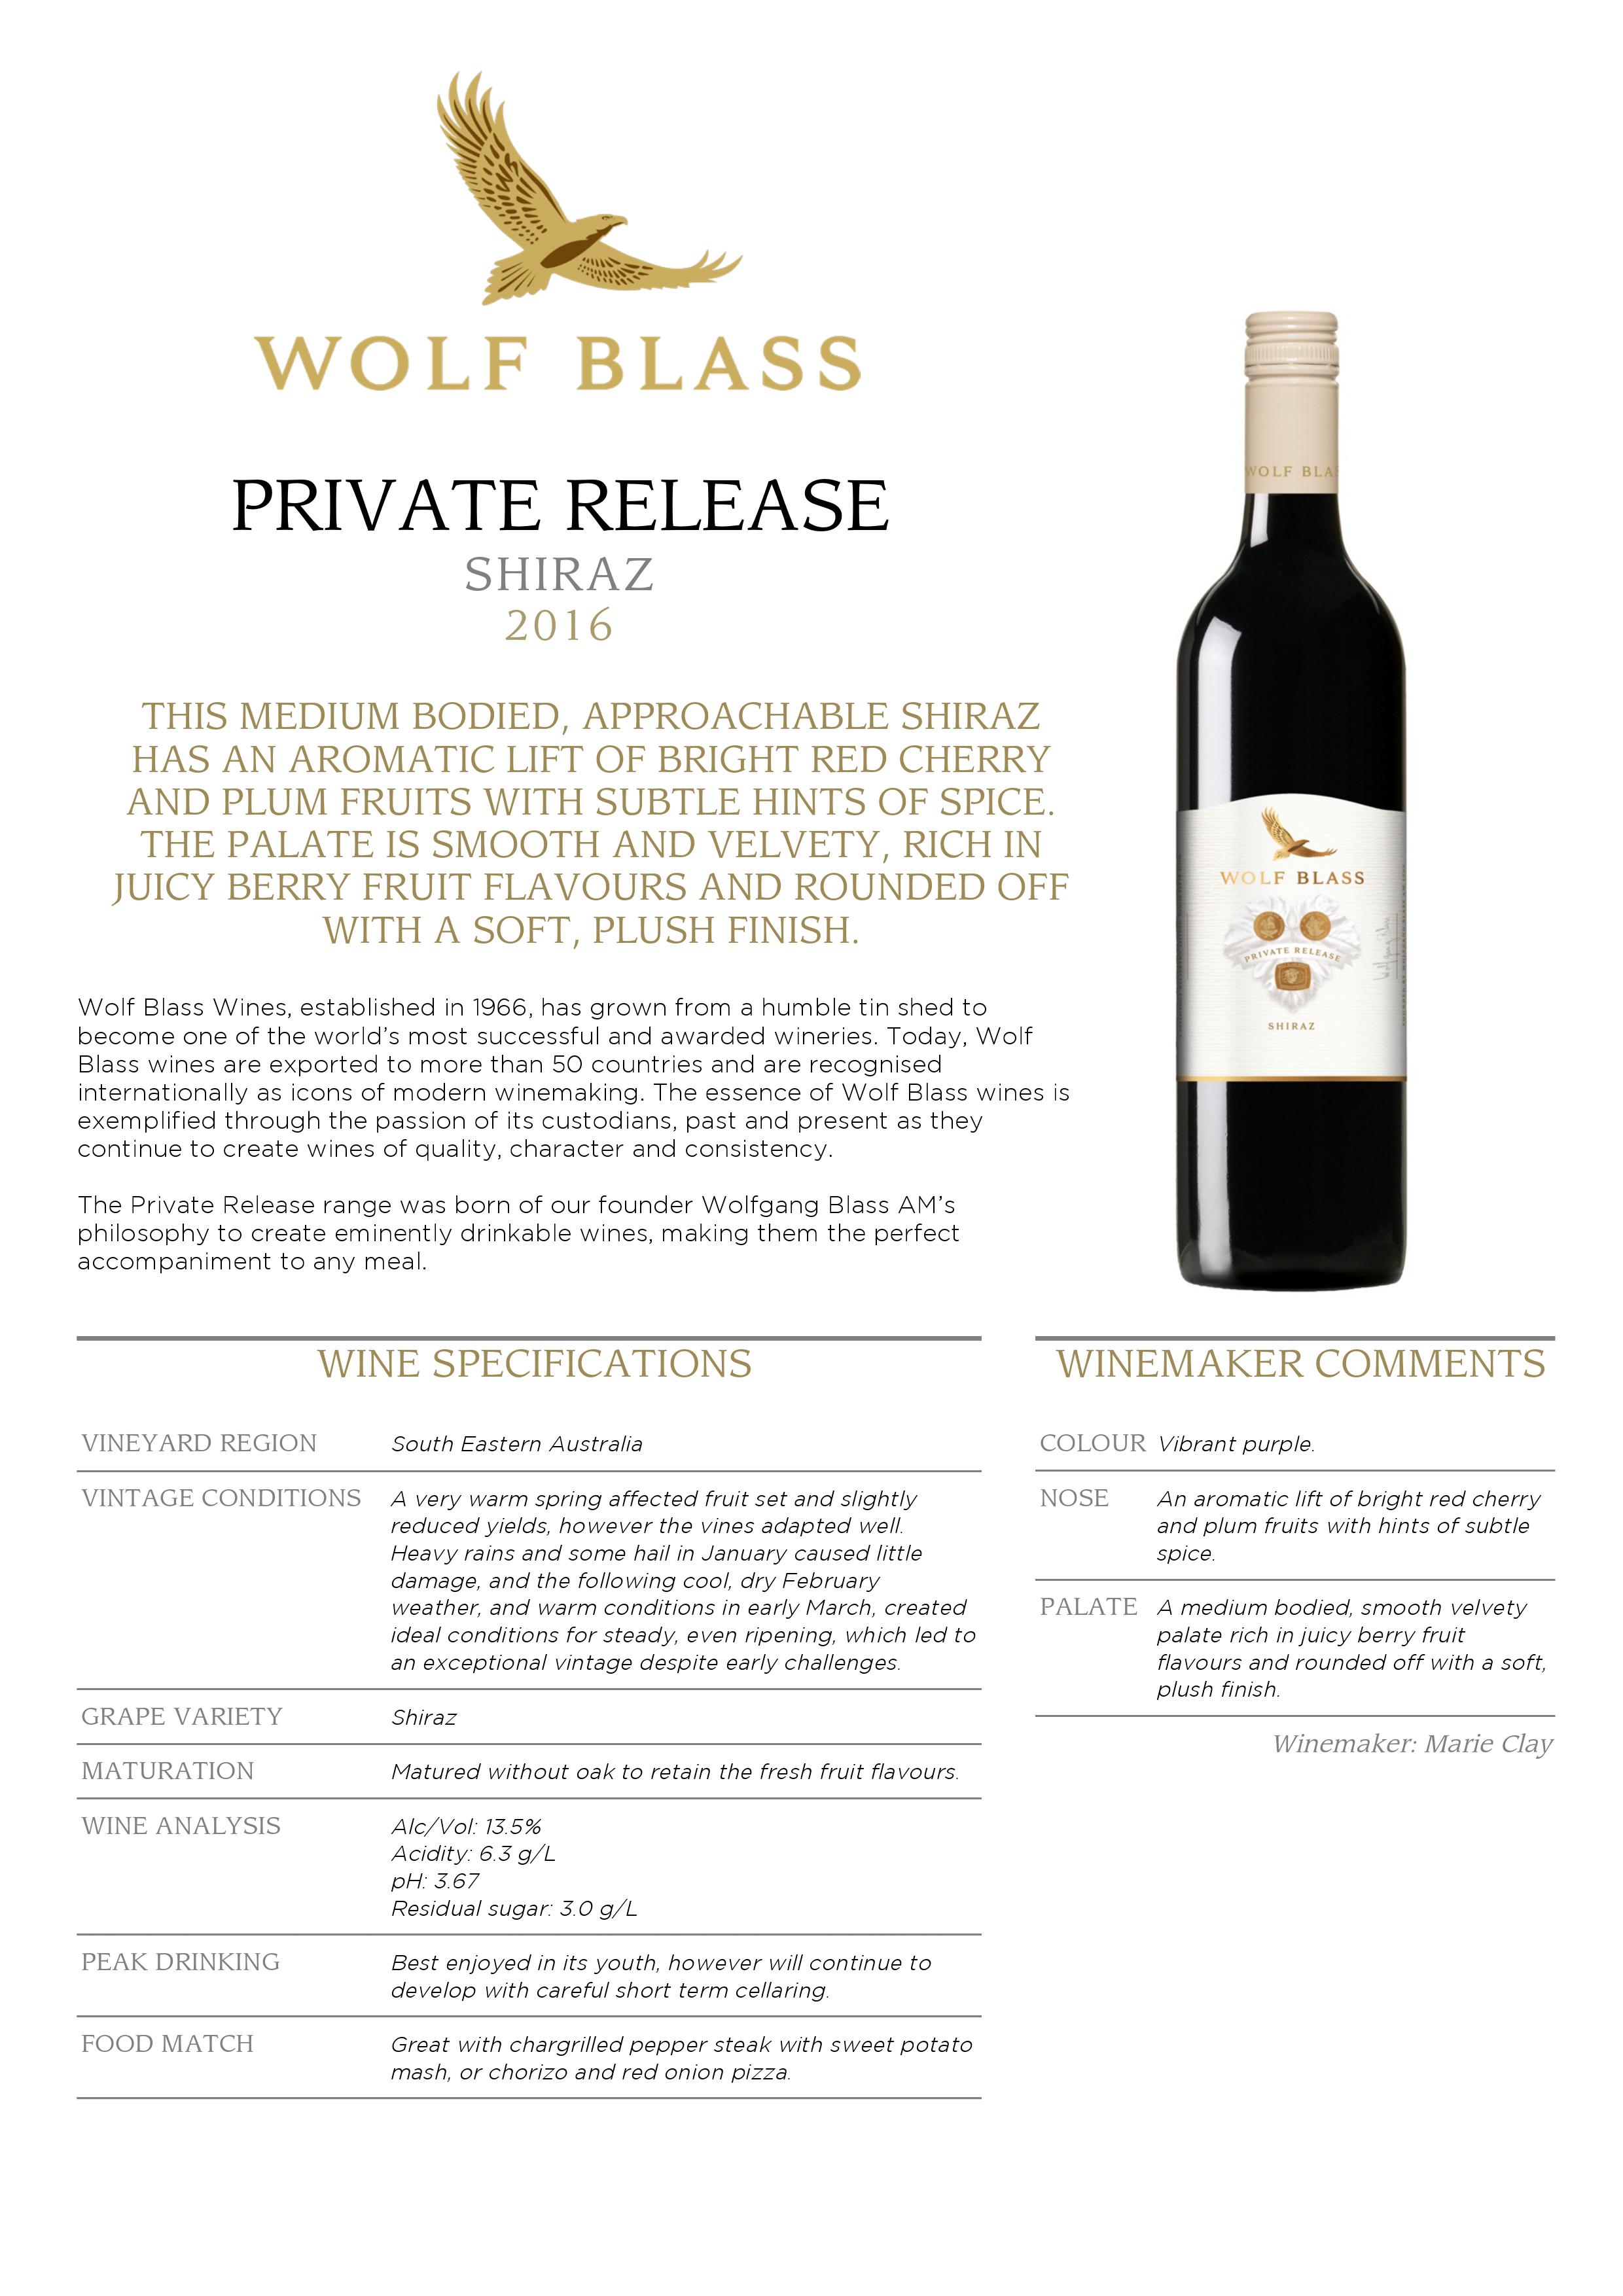 Wolf Blass Private Release - This medium-bodied, approachable Shiraz has an aromatic lift of bright red cherry and plum fruits with subtle hints of spice. The palate is smooth and velvety, rich in juicy berry fruit flavours and rounded off with a soft, plush finish.